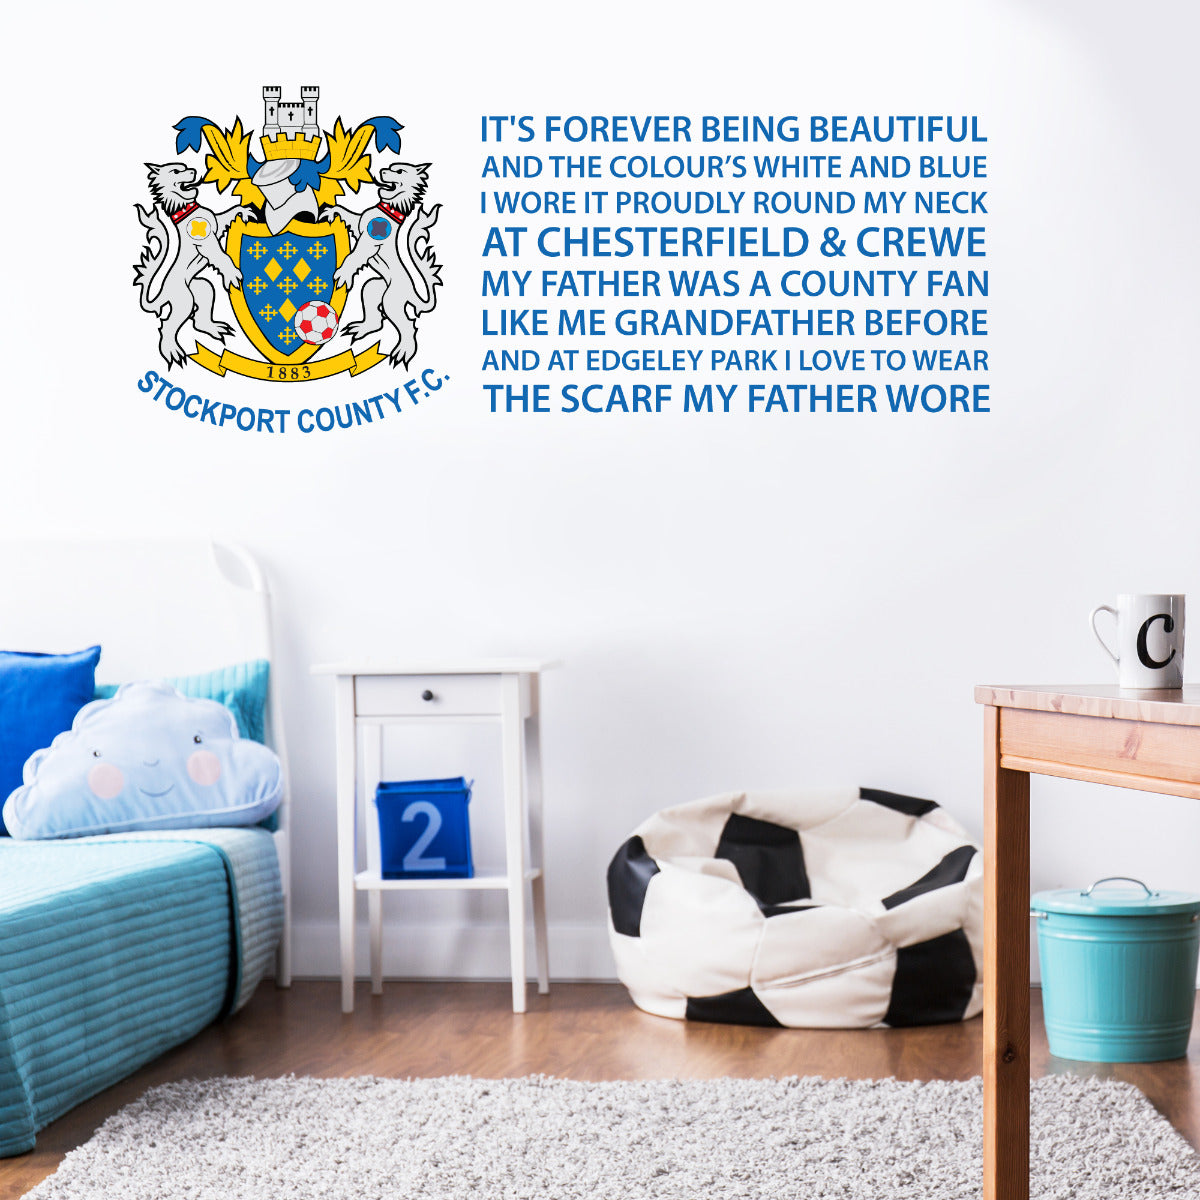 Official Stockport County Crest Scarf My Father Wore Song Wall Sticker